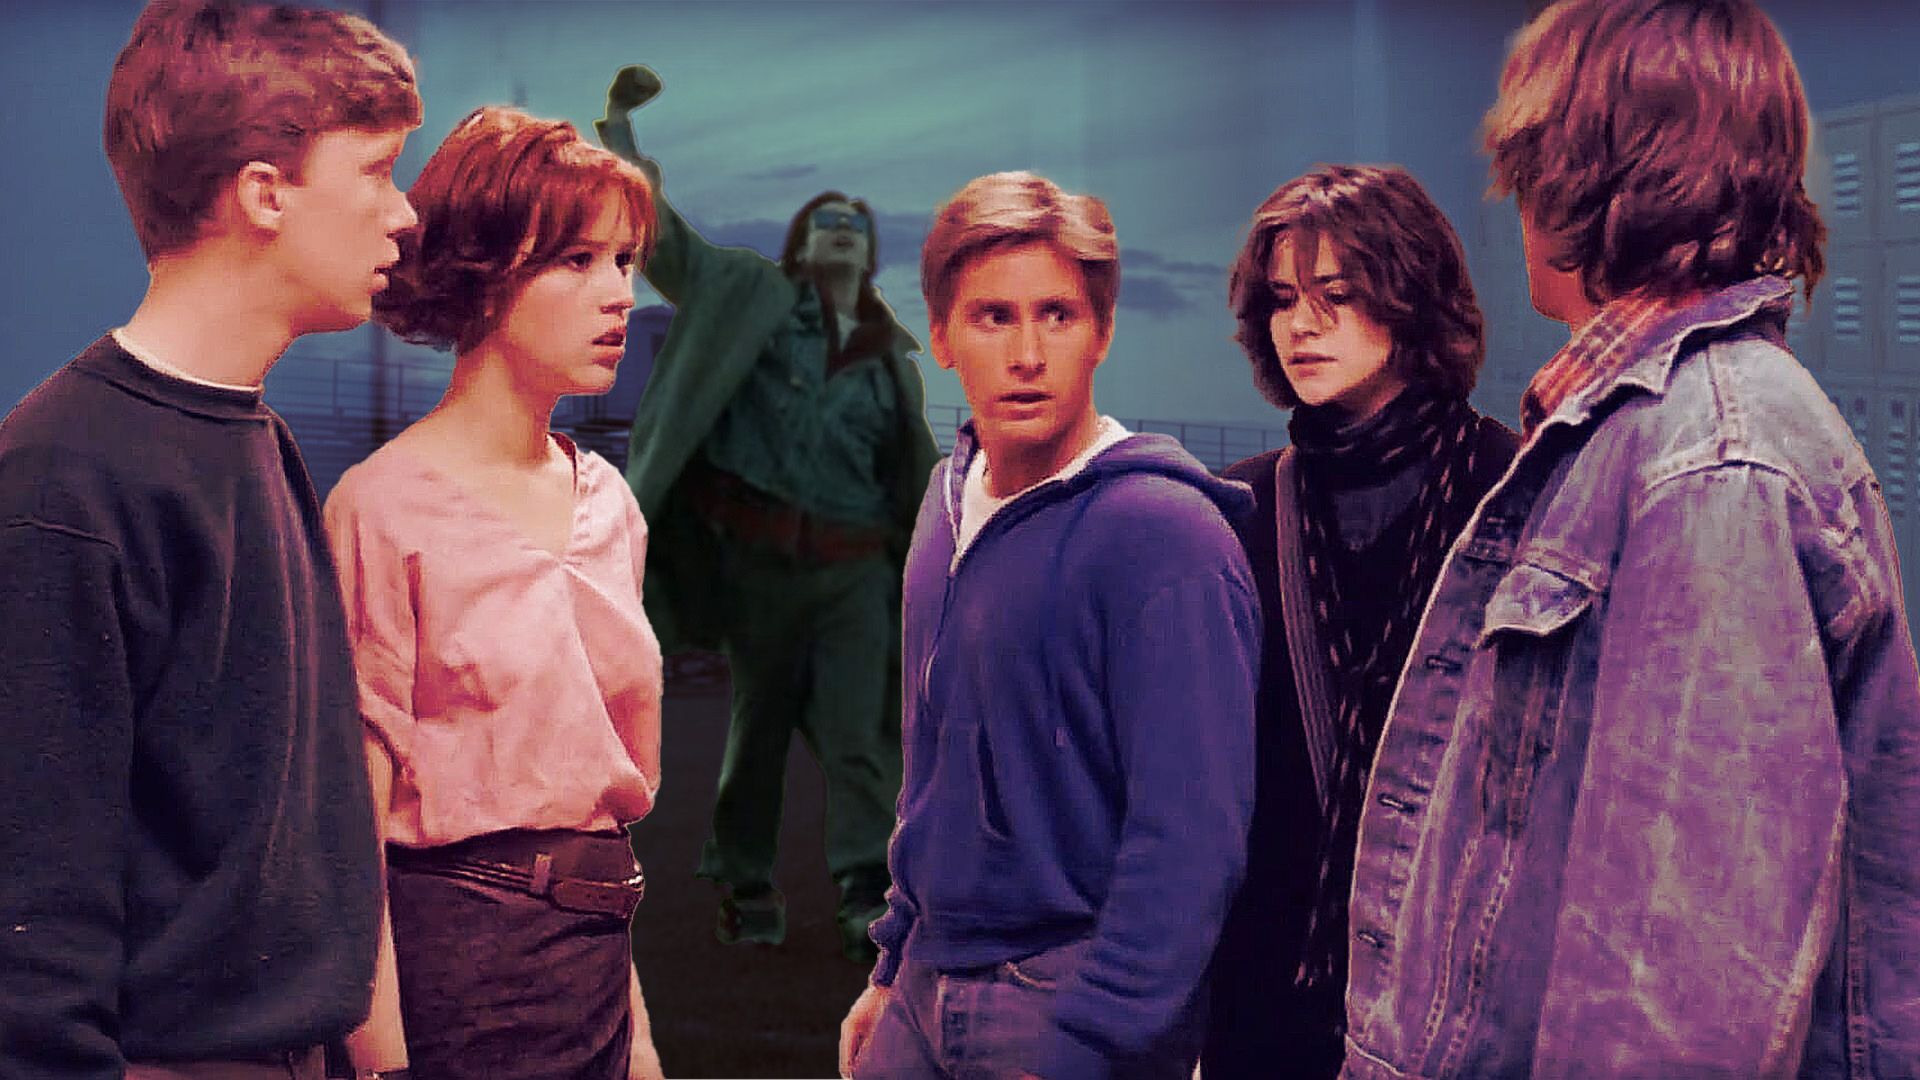 Why The Breakfast Club deserves a sequel instead of a remake